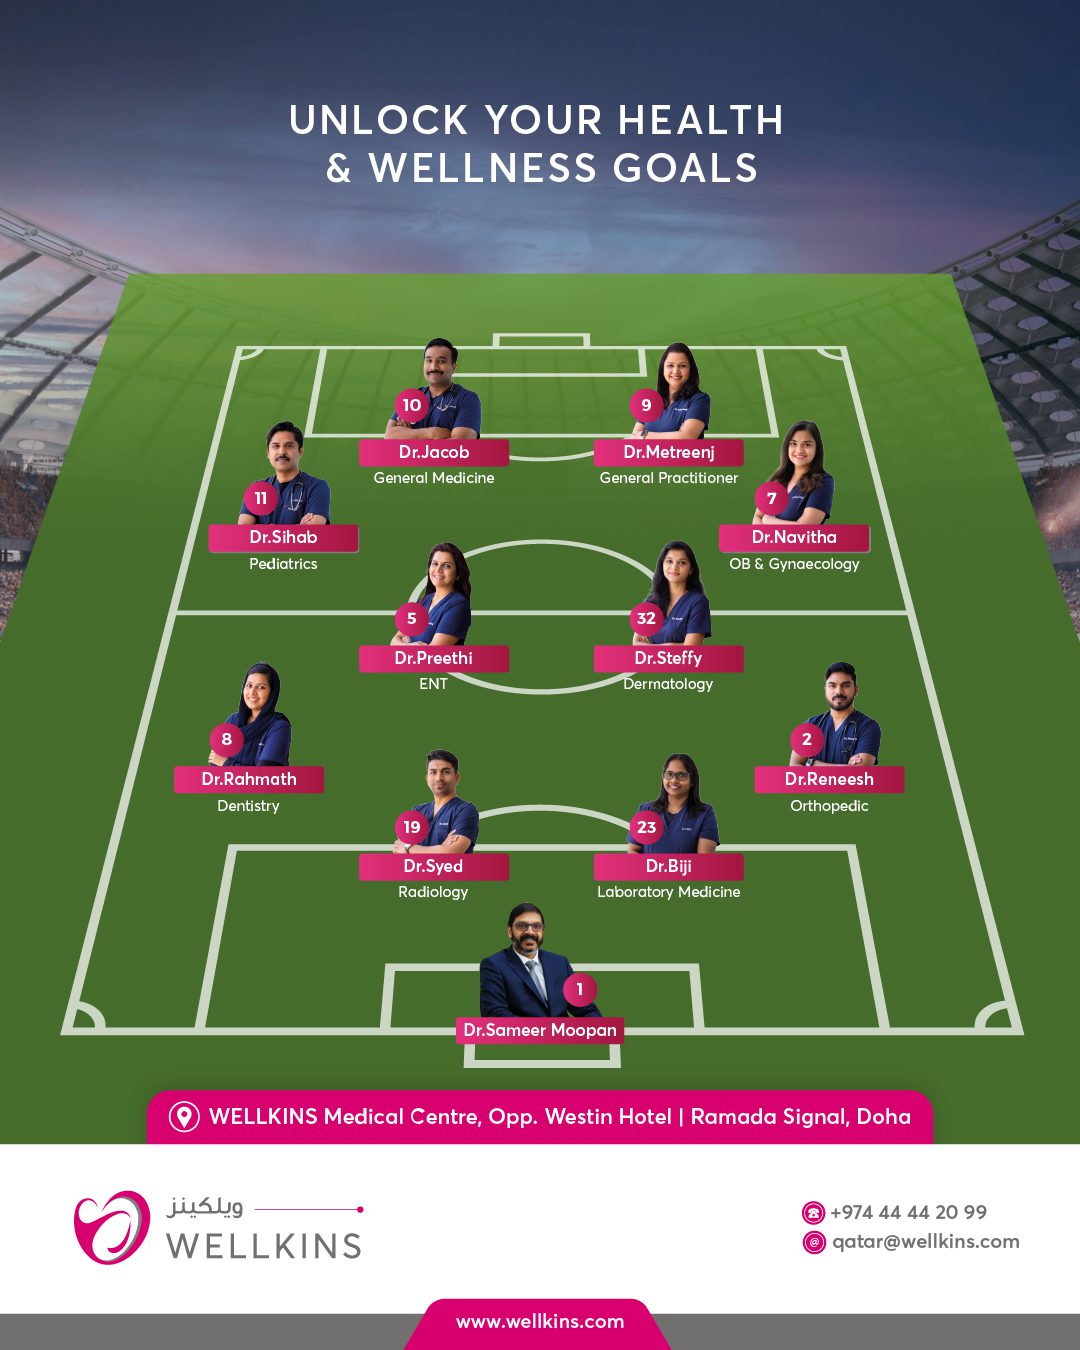 Unlock your health & wellness goals with WELLKINS Medical Centre, Opp. Westin Hotel, Ramada, Doha.
.
.
.
.
_______________________________
To learn more about #WELLKINSQATAR and our services, kindly visit our website www.wellkins.com
Helpline: 4444 2099
_______________________________
#Wellkinsqatar #wellkins #medicalcentre #qatar2022